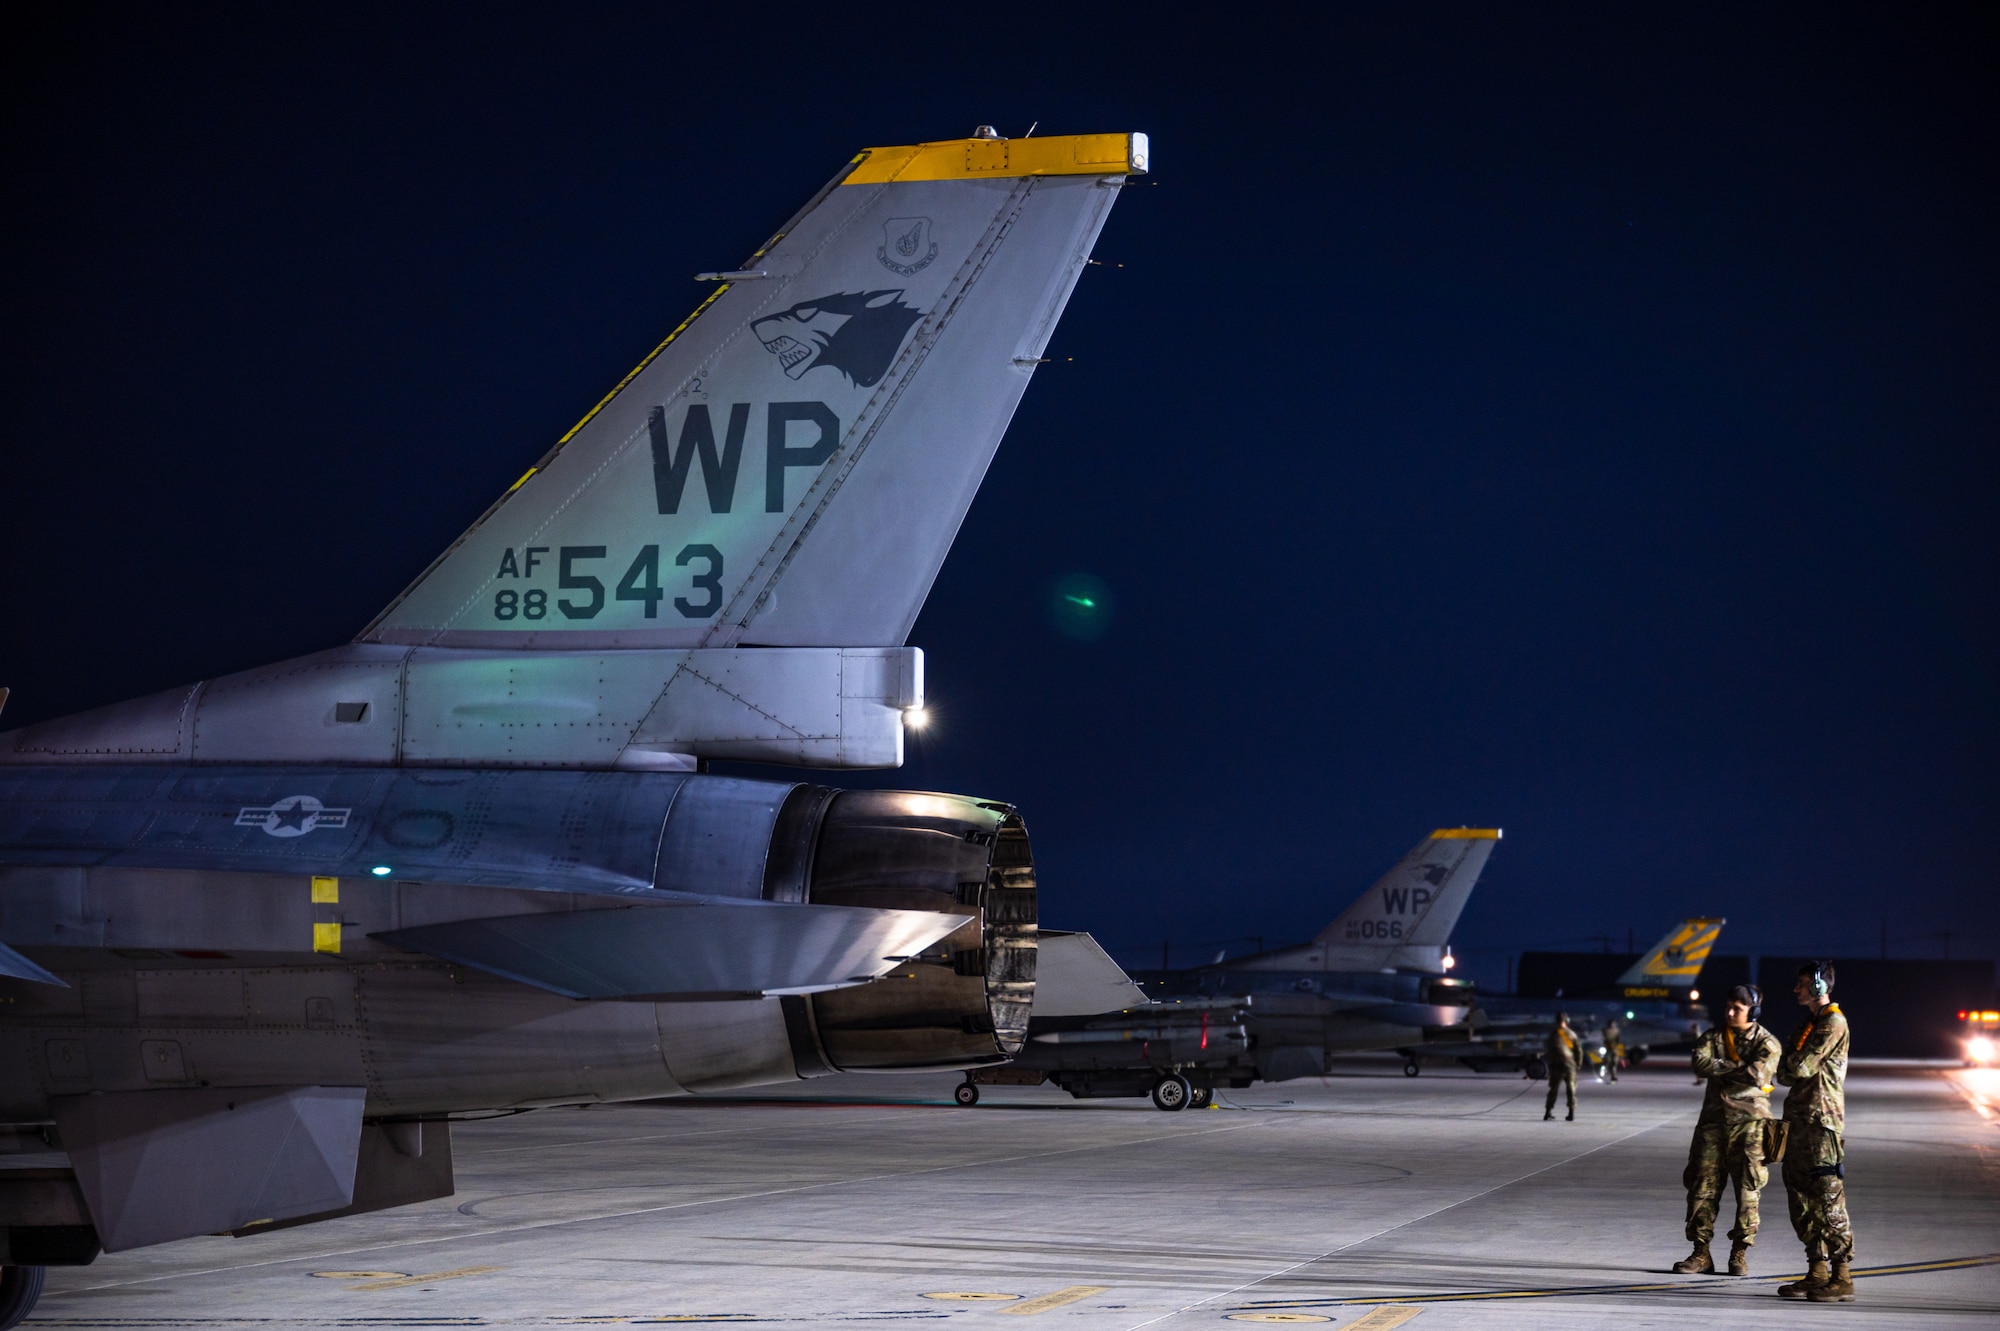 80th Fighter Generation Squadron Airmen observe an F-16 Fighting Falcon while conducting preflight systems inspections.